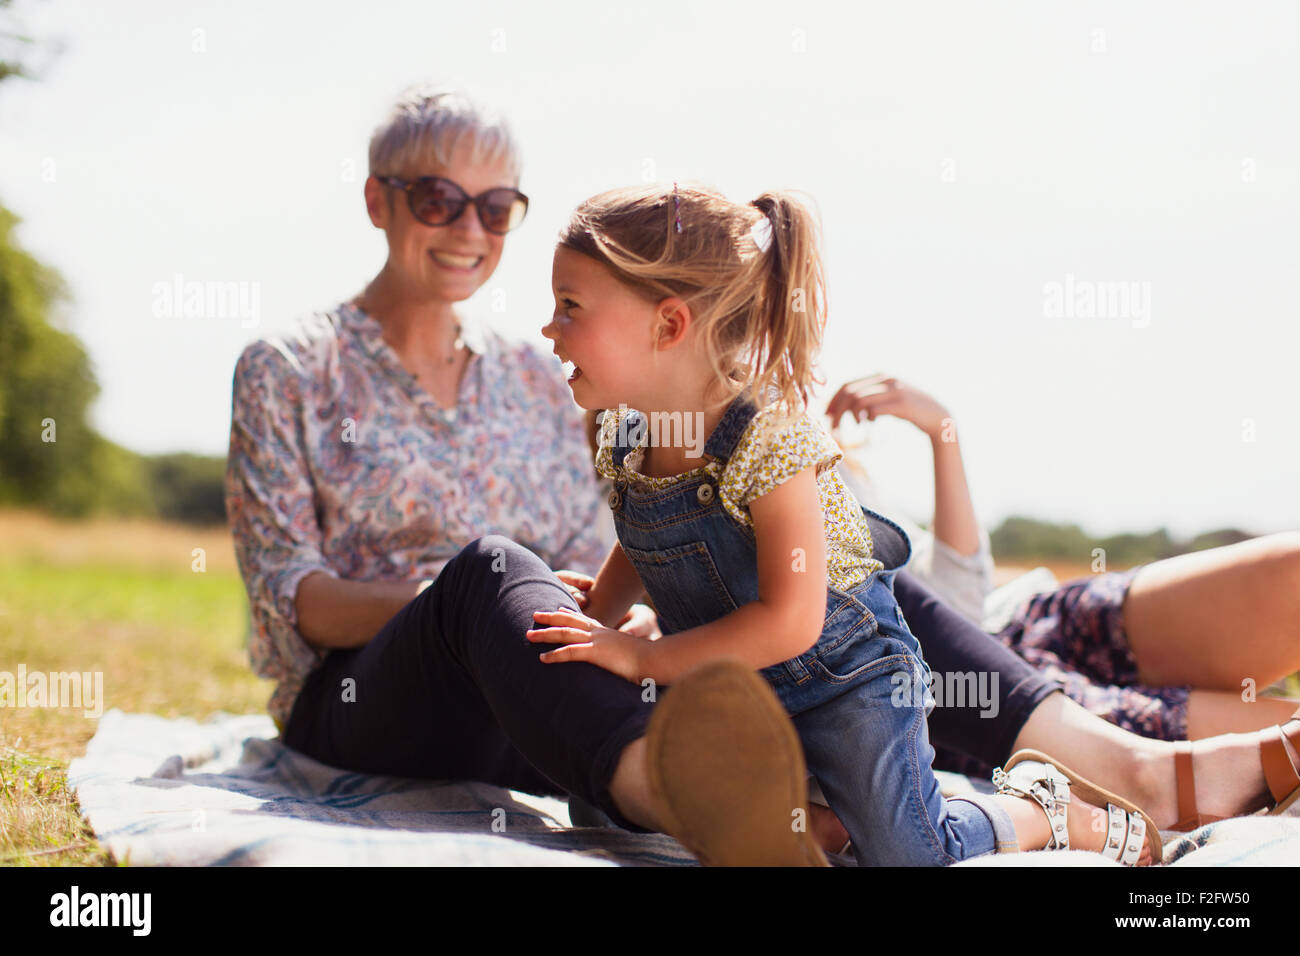 Grandmother and granddaughter laughing on blanket in sunny field Stock Photo